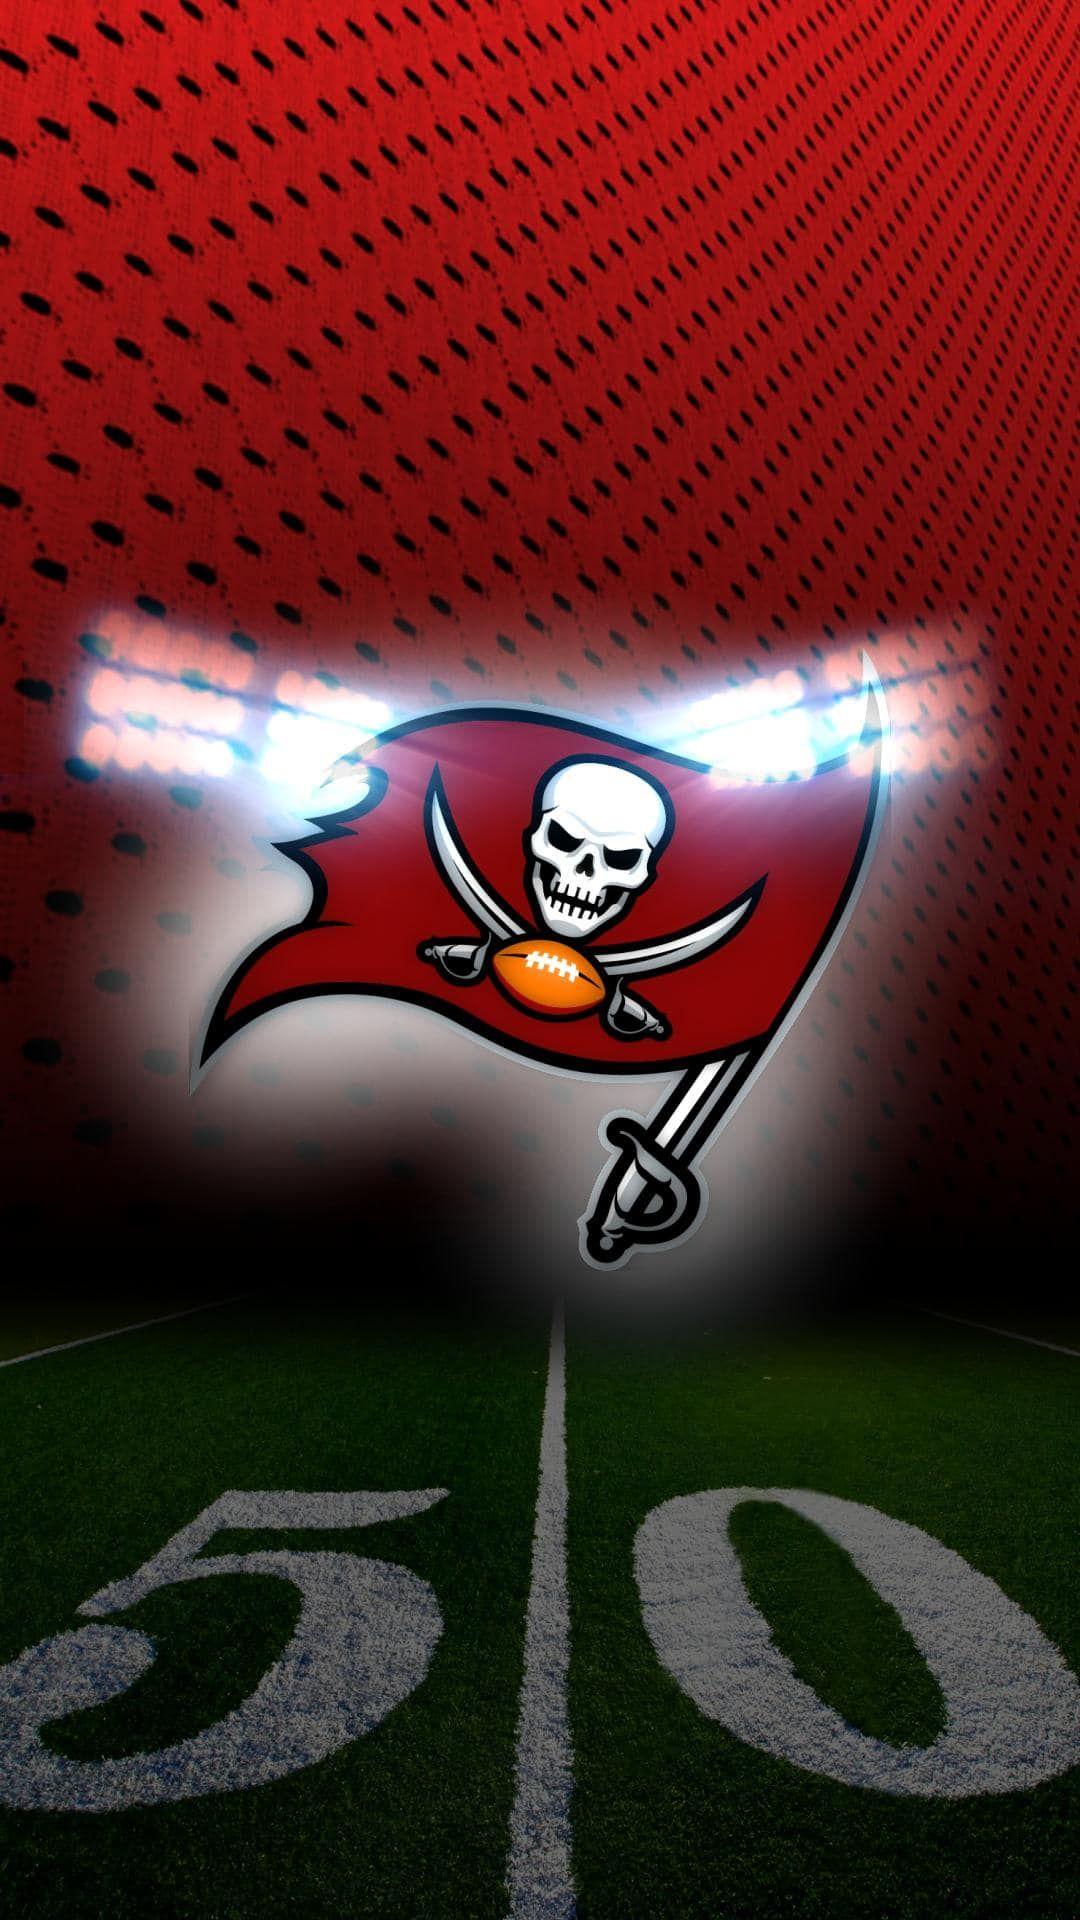 16644 Tampa Bay Buccaneers Wallpaper For Android Bay Buccan. Tampa Bay Buccaneers Logo, Tampa Bay Buccaneers, Tampa Bay